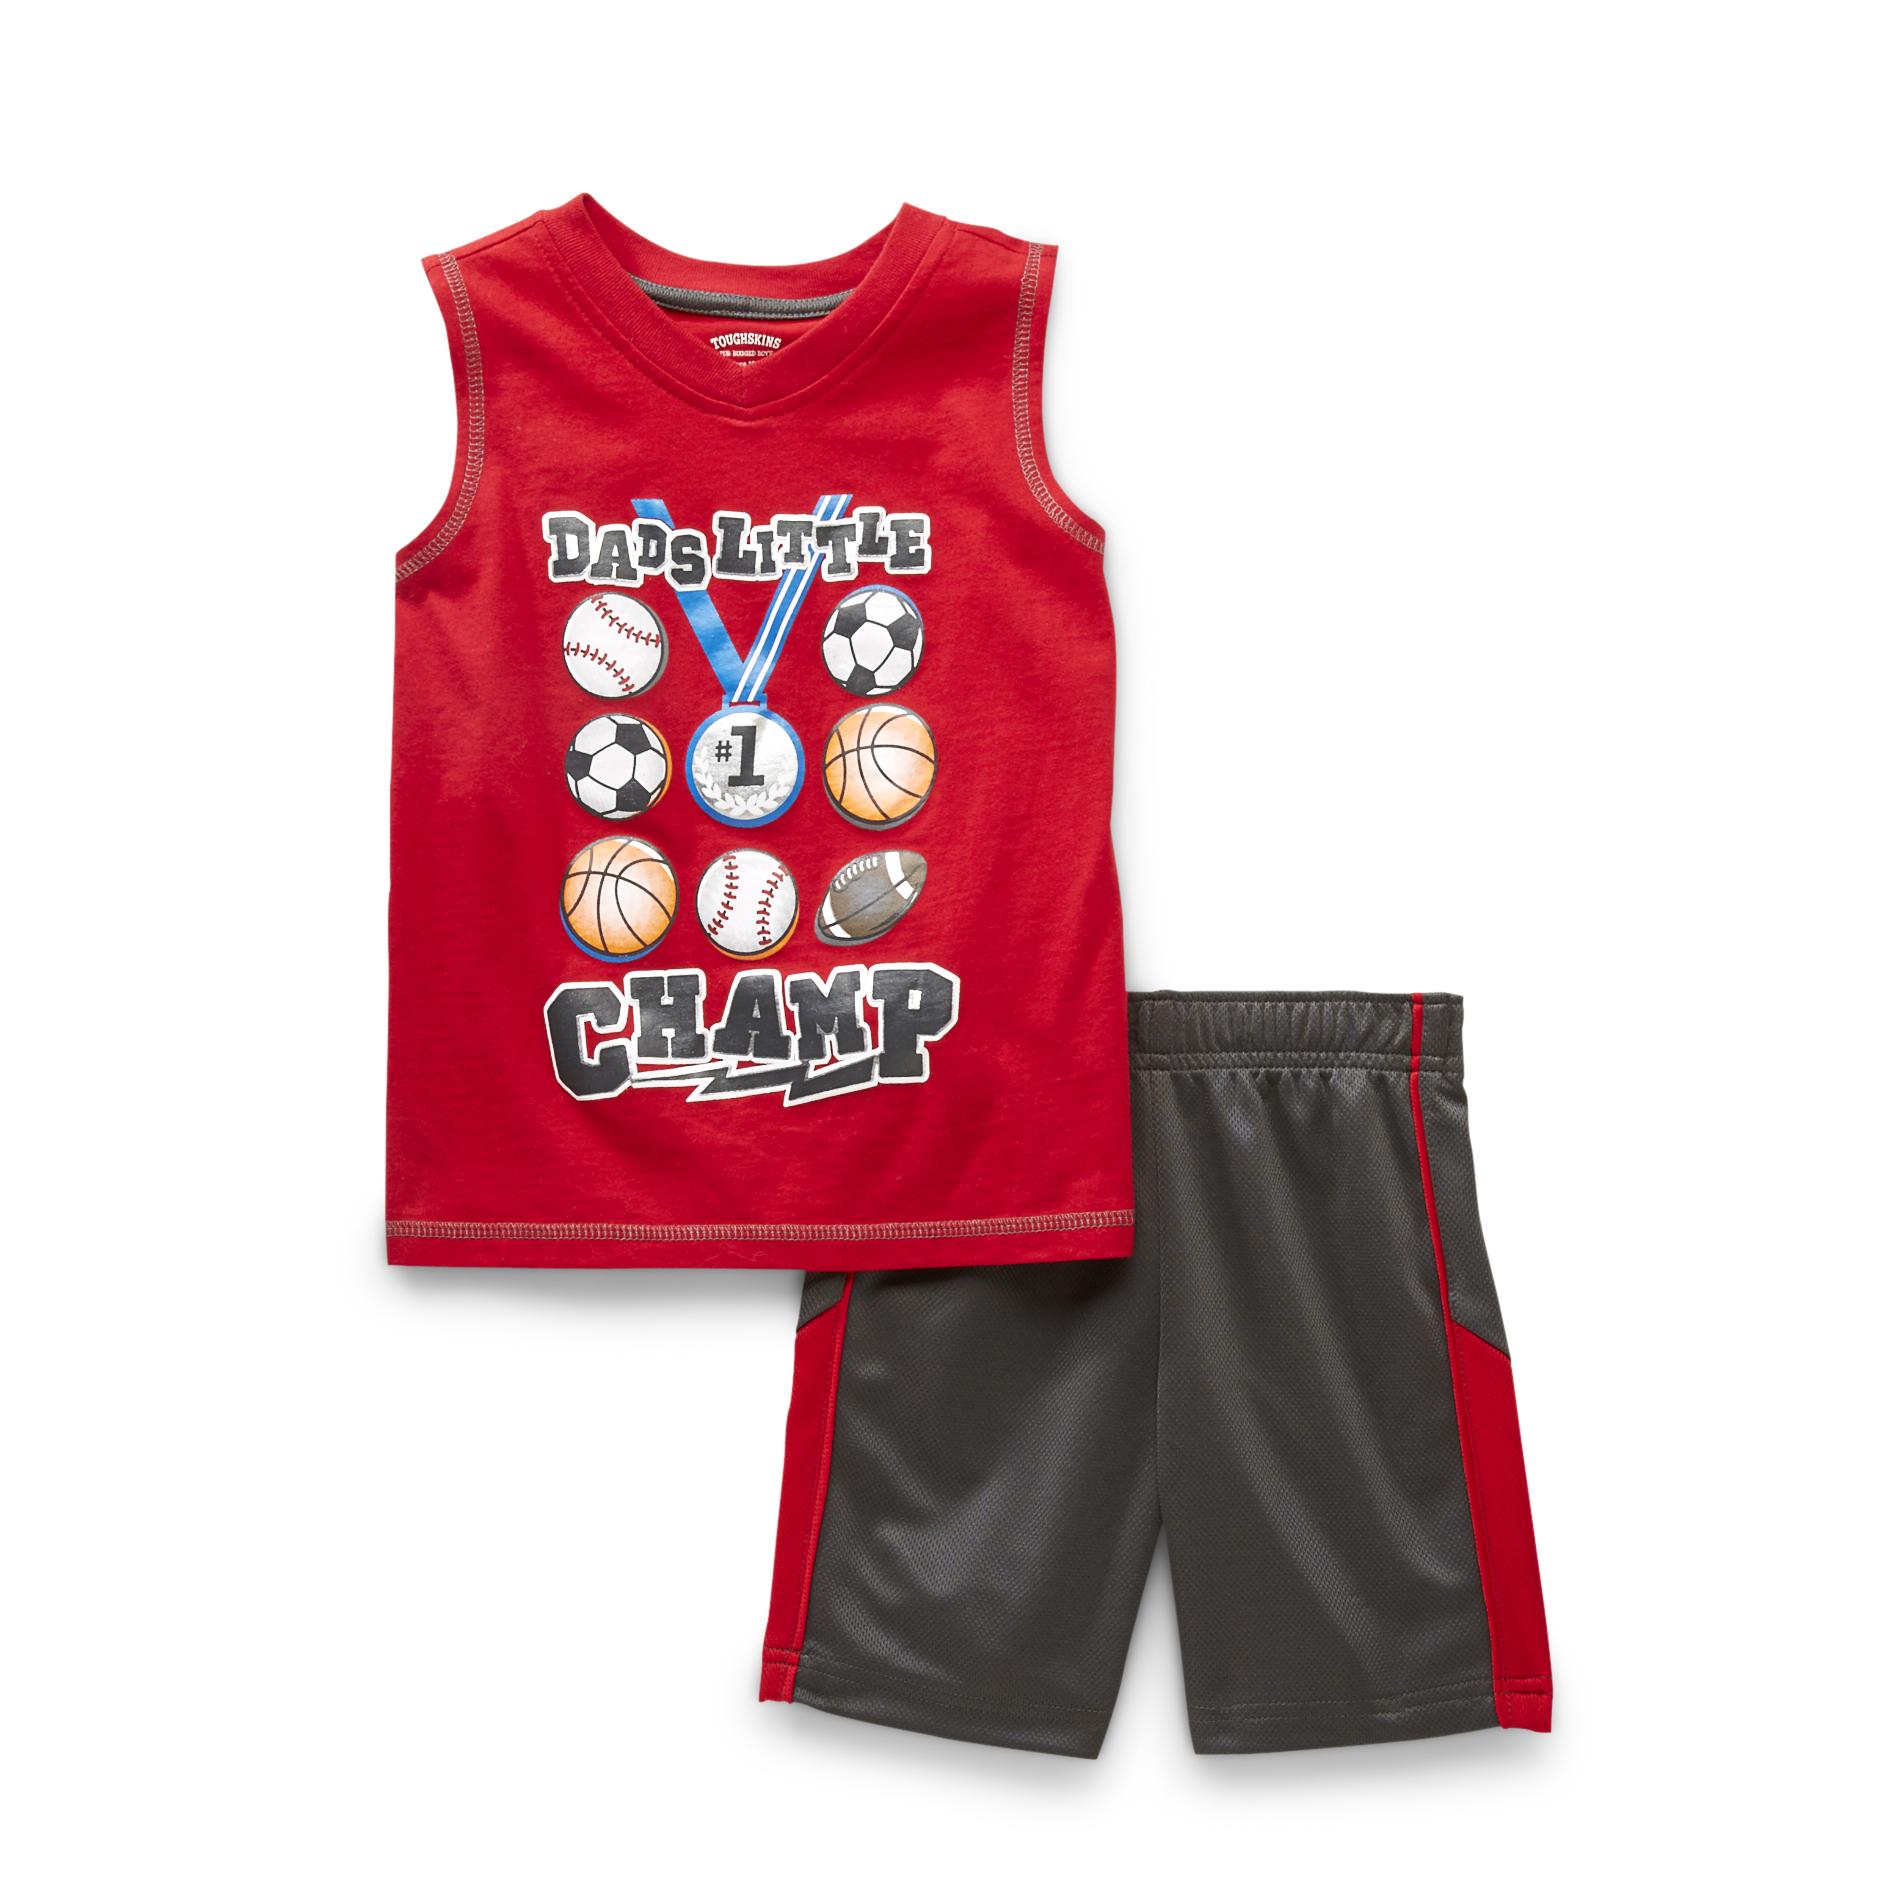 Toughskins Infant & Toddler Boy's Muscle T-Shirt & Shorts - Dad's Champ